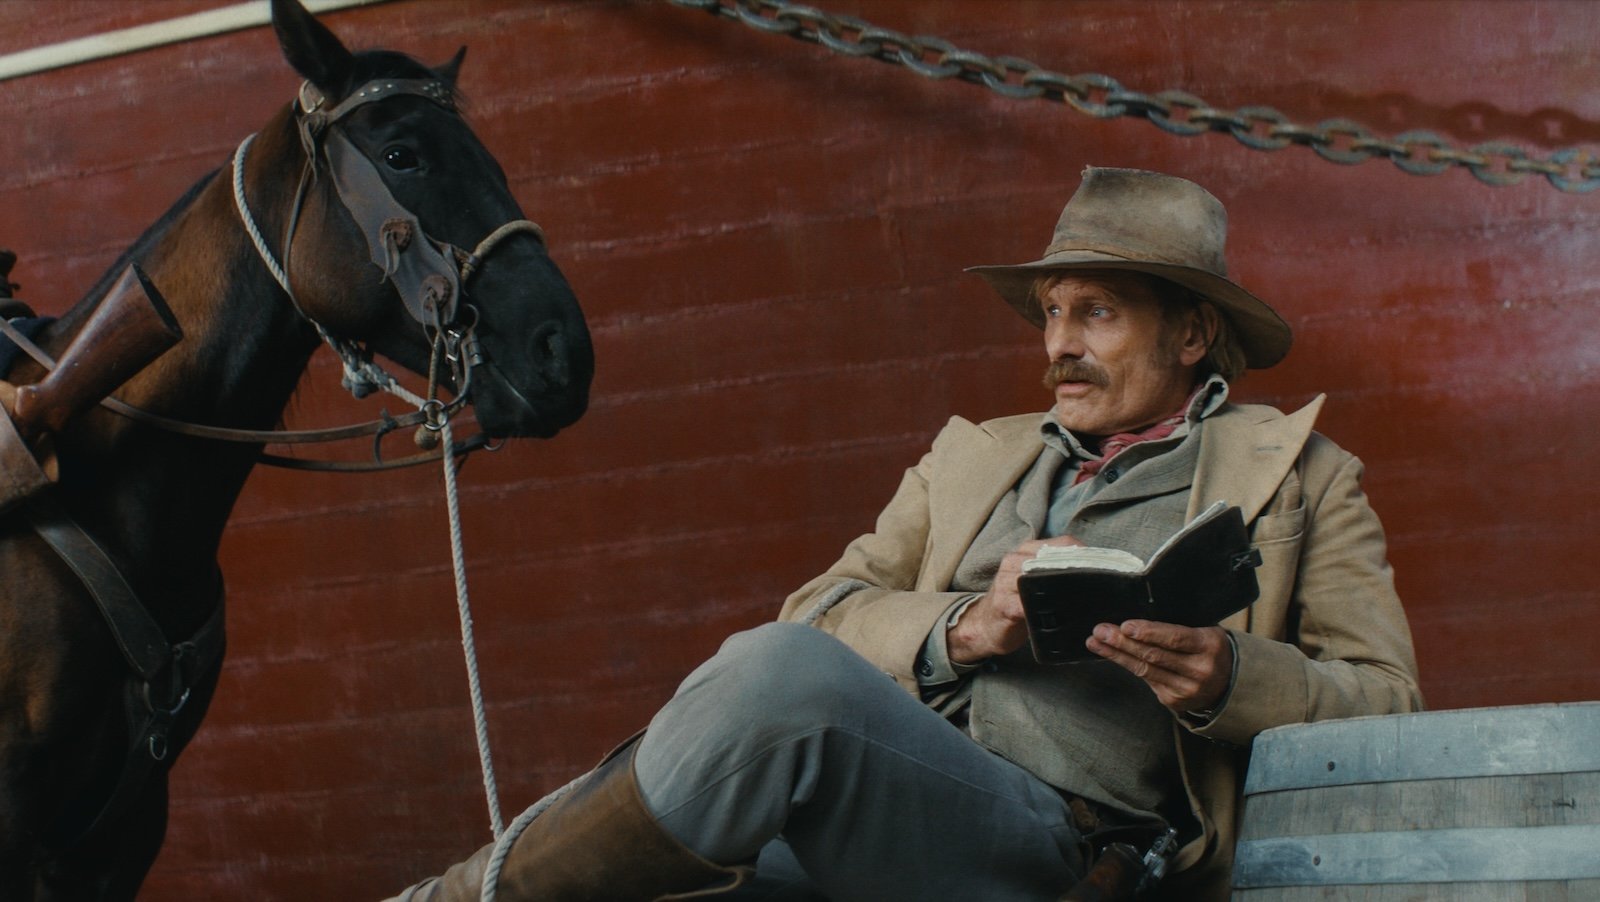 A man in a fedora sits with his legs crossed reading a book leaning against a red brick wall; a horse stands beside him.